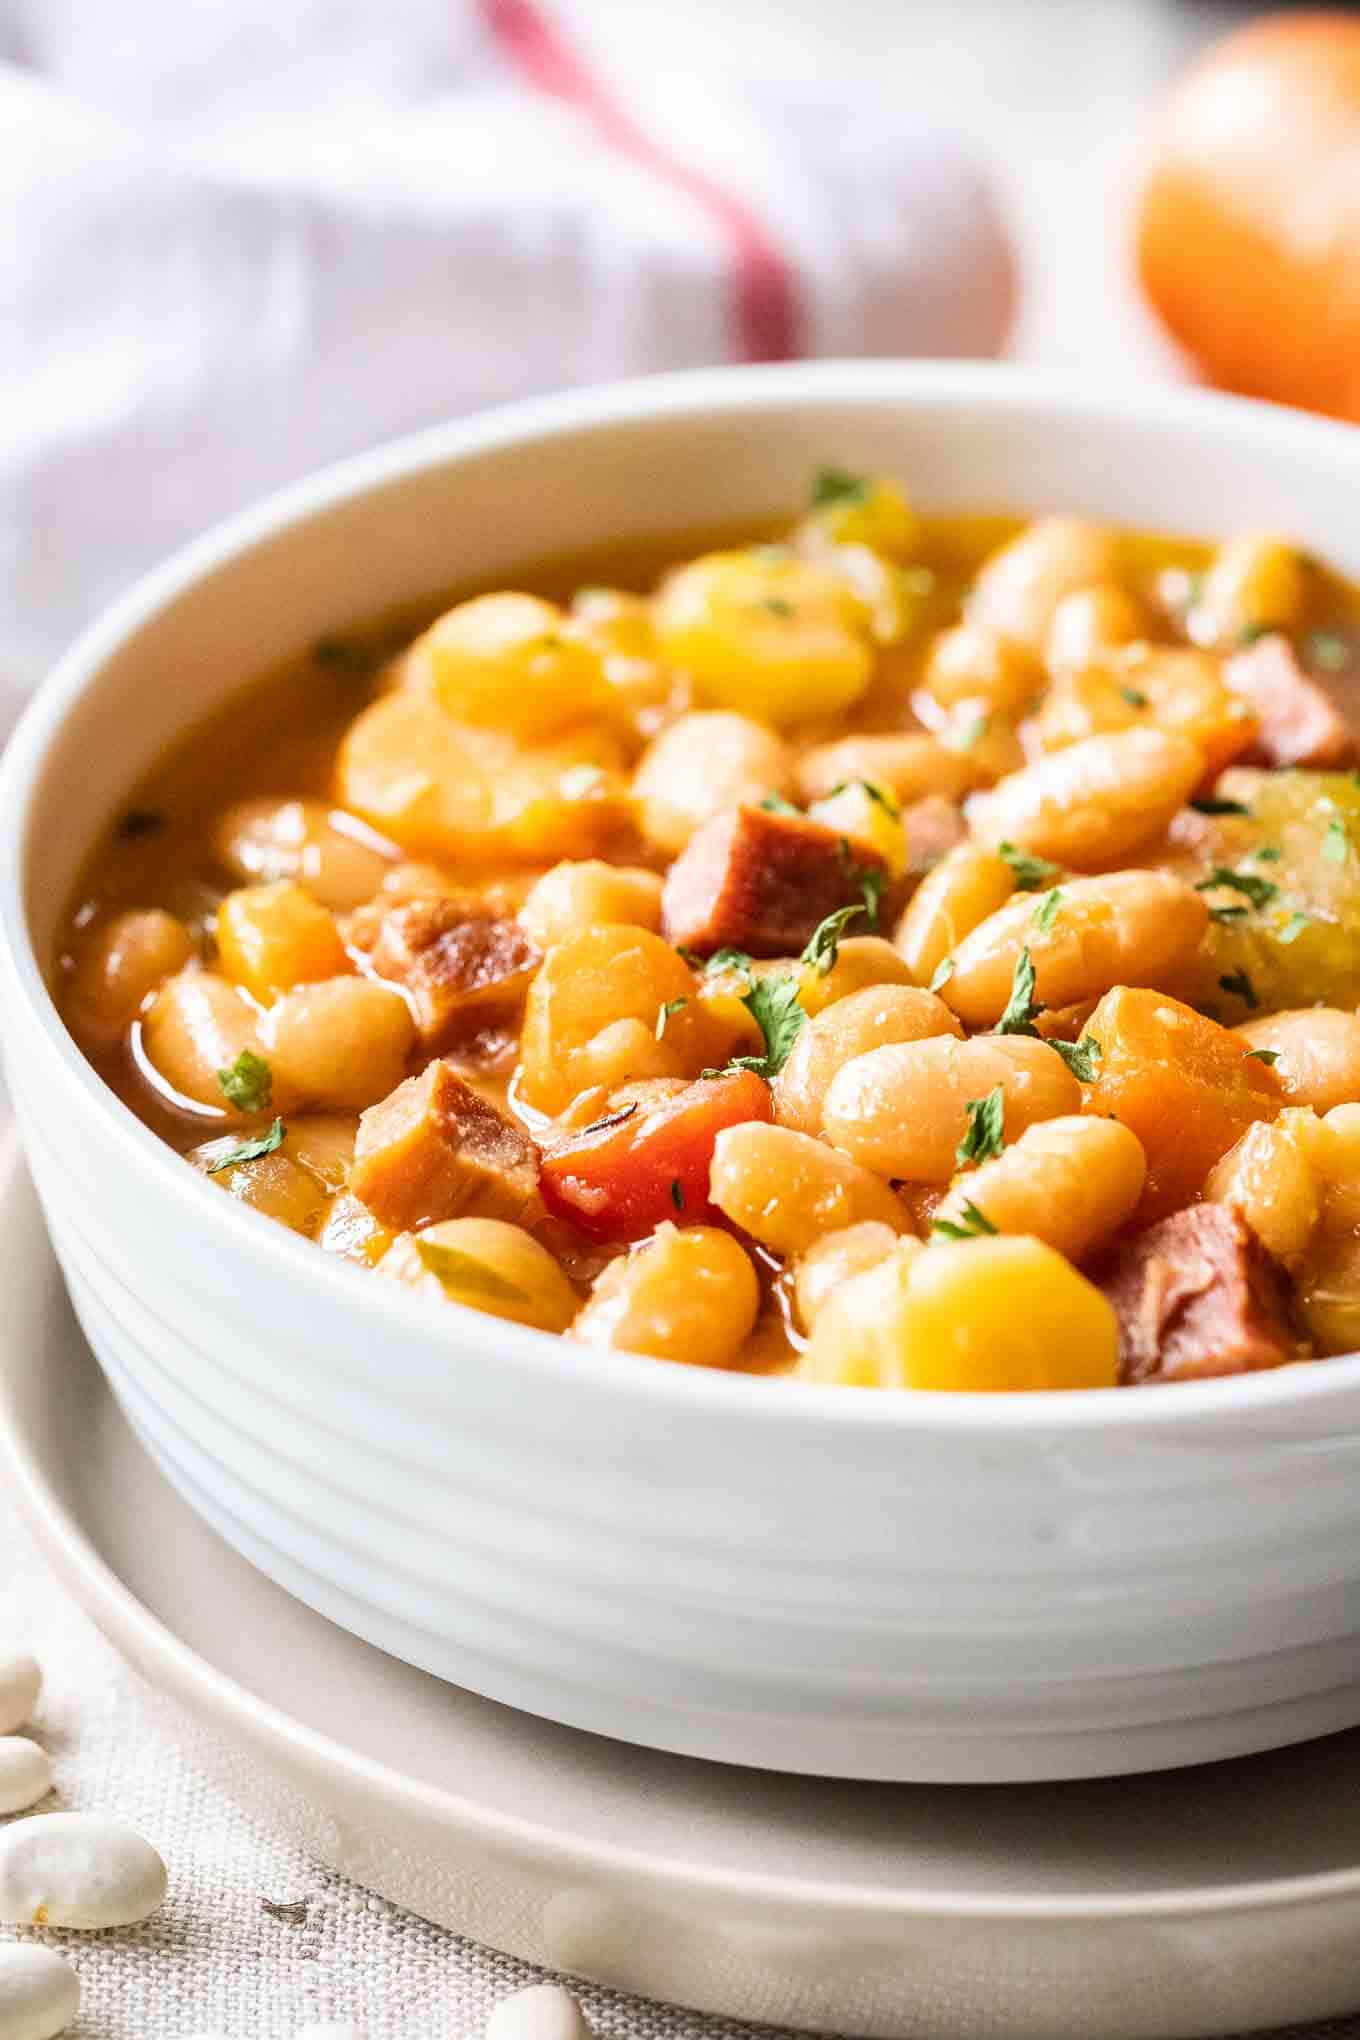 How To Make Ham And Navy Beans In Crock Pot / Best Slow Cooker Navy Bean Soup Crockpot Ham And Beans Bean Soup Recipes Navy Bean Soup - Navy beans in crockpot recipes.